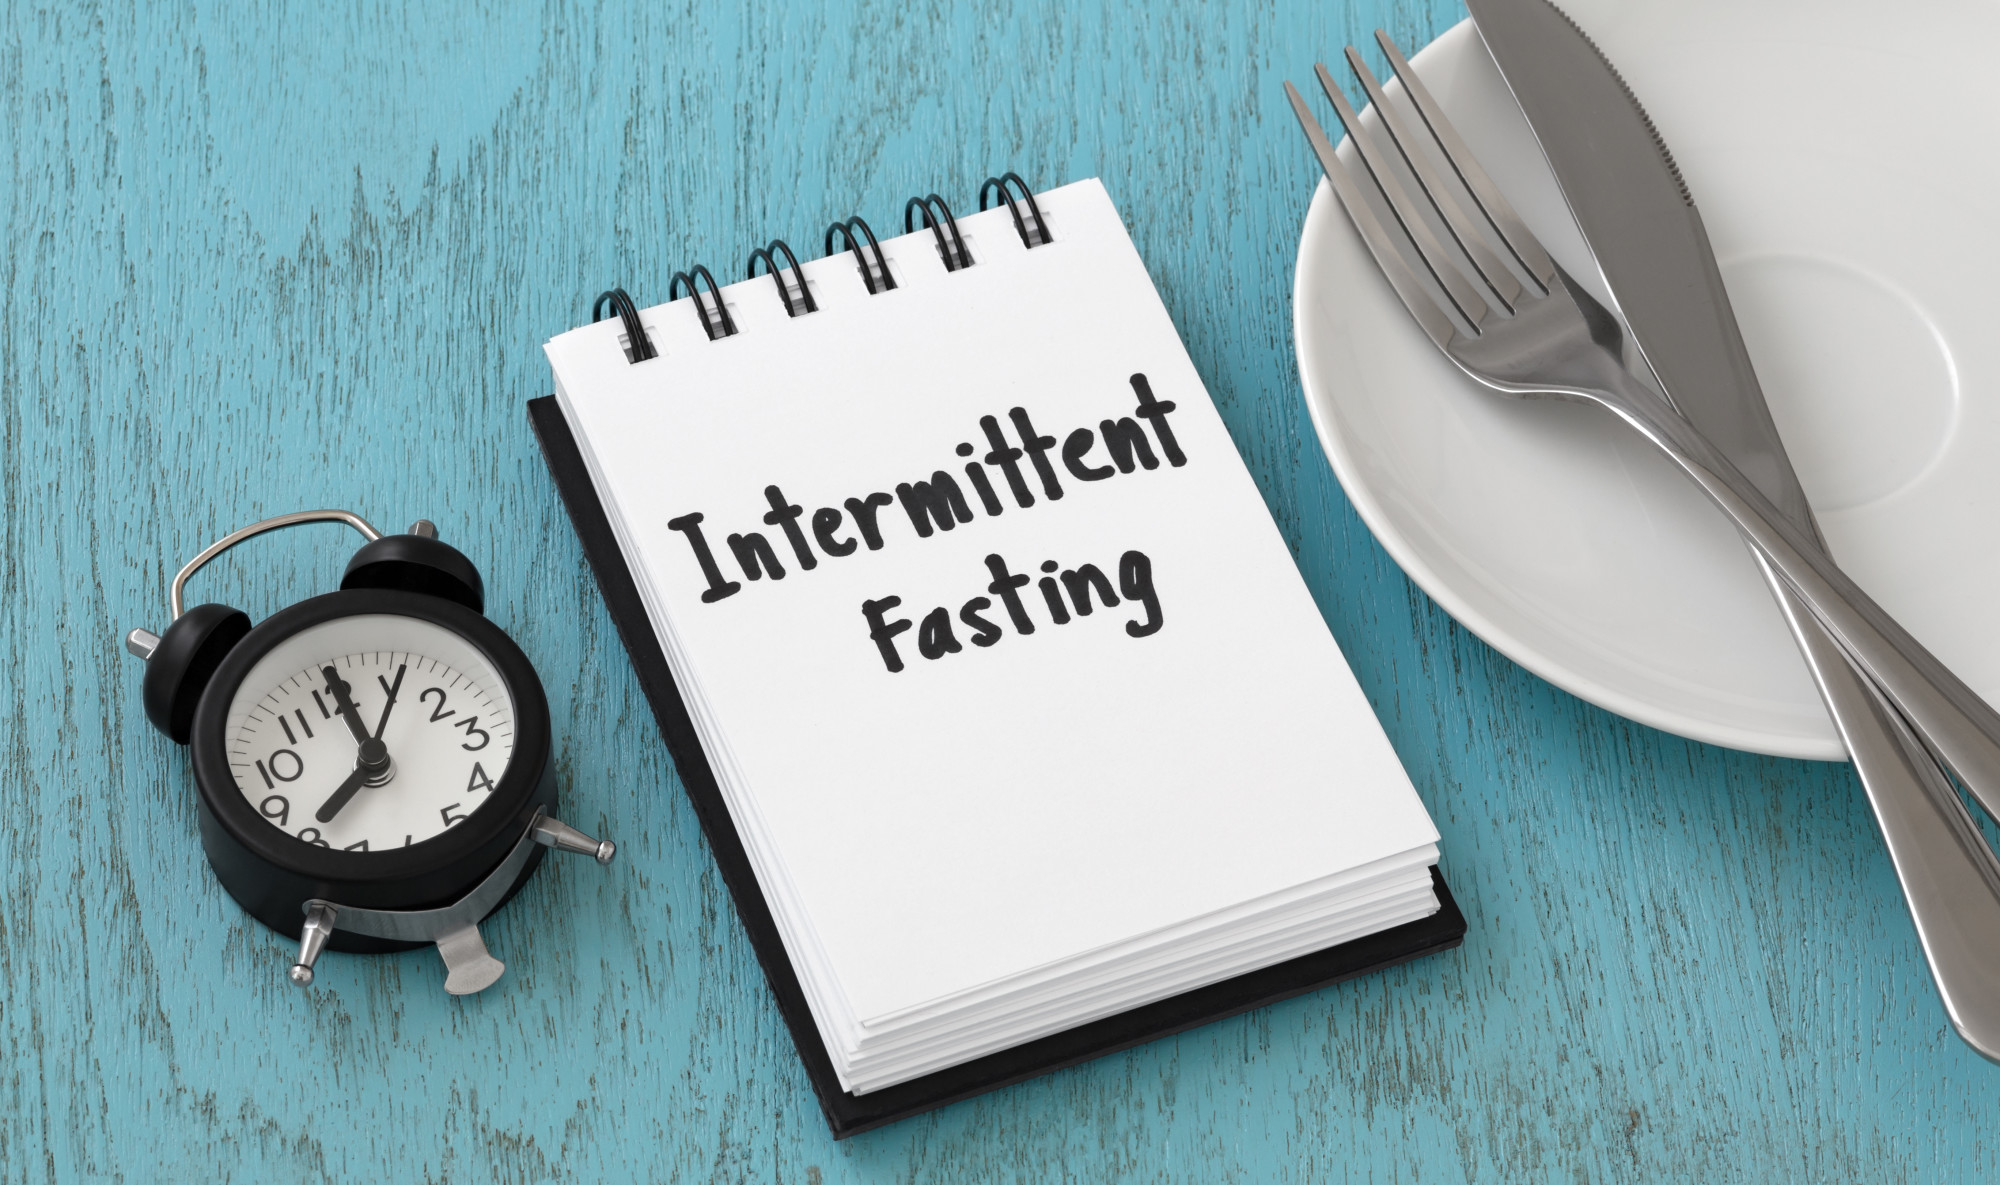 Intermittent fasting is an extremely effective way to control how much you eat, but how do you find success? Use these intermittent fasting tips!